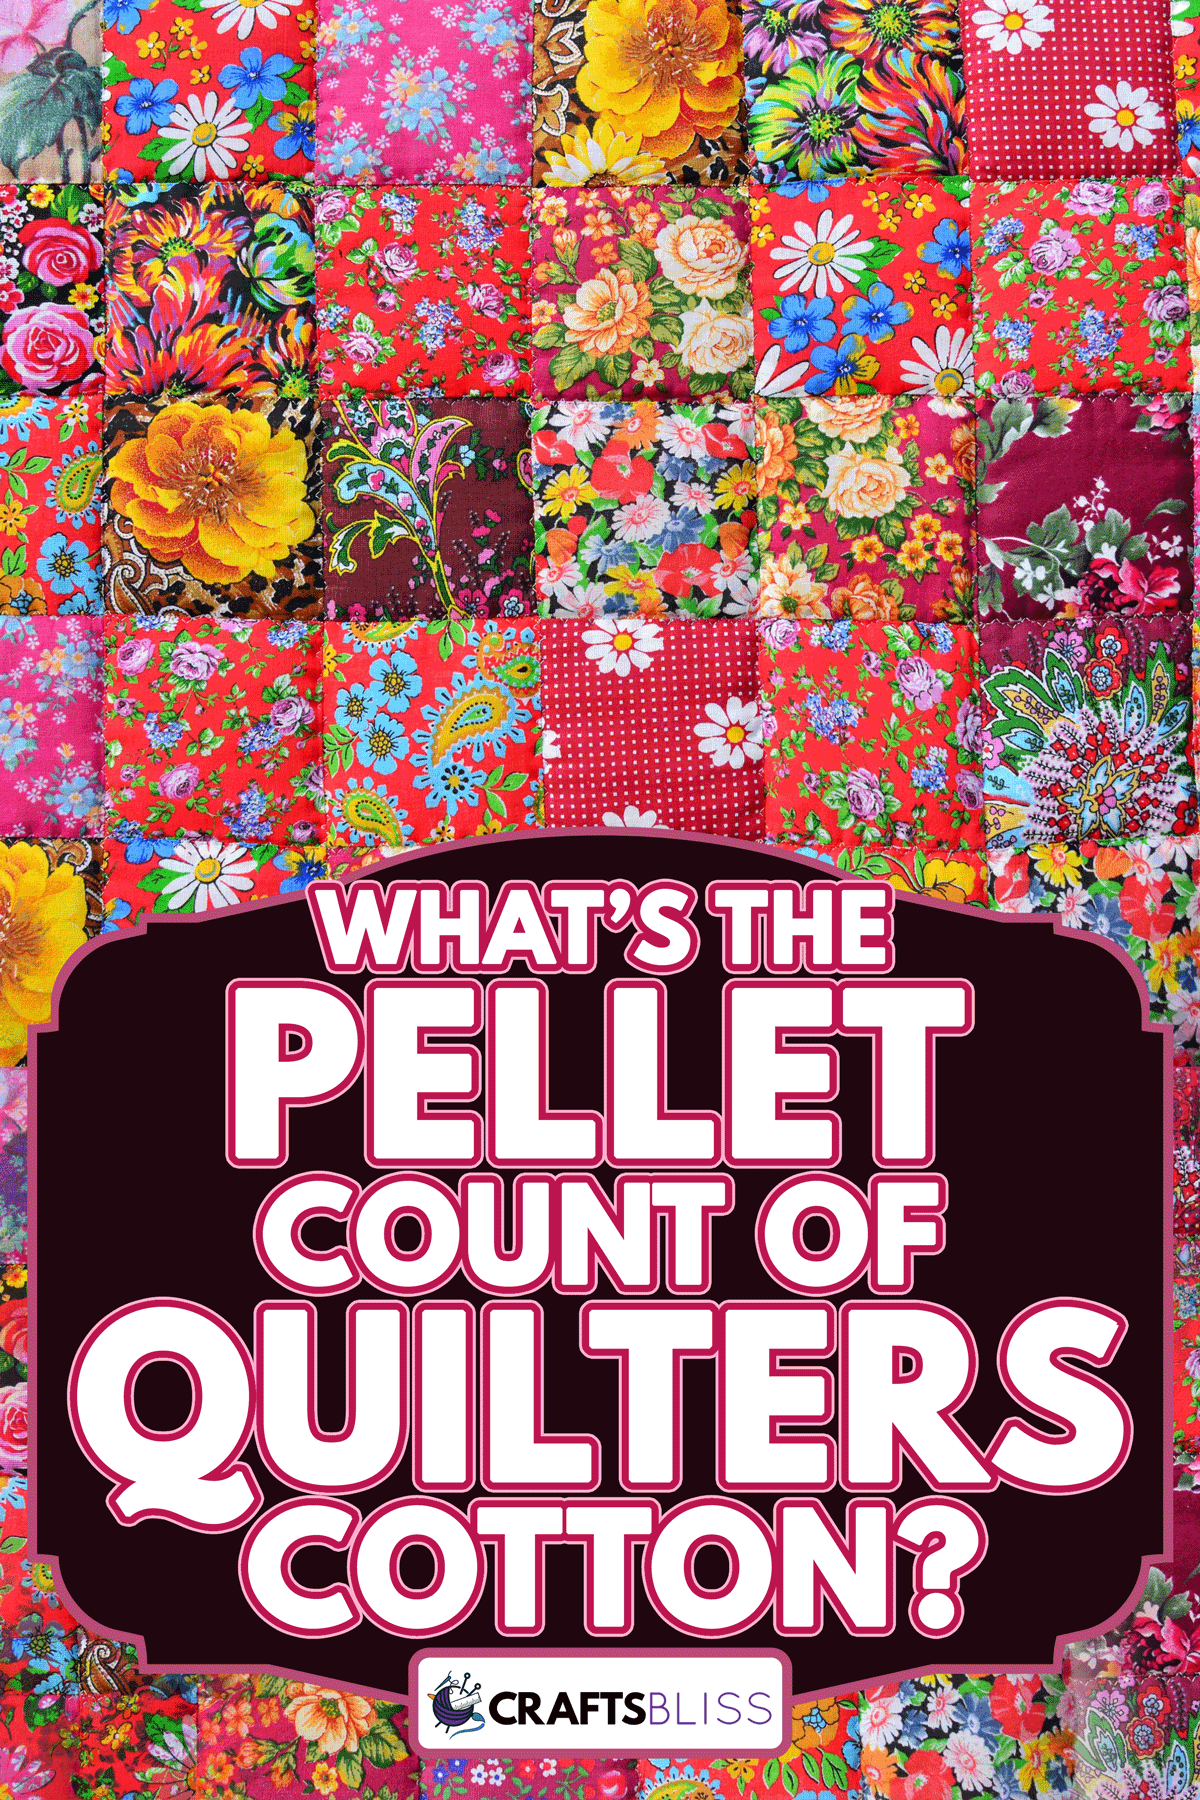 Handmade patchwork quilt with flower print, What's The Thread Count Of Quilters Cotton?